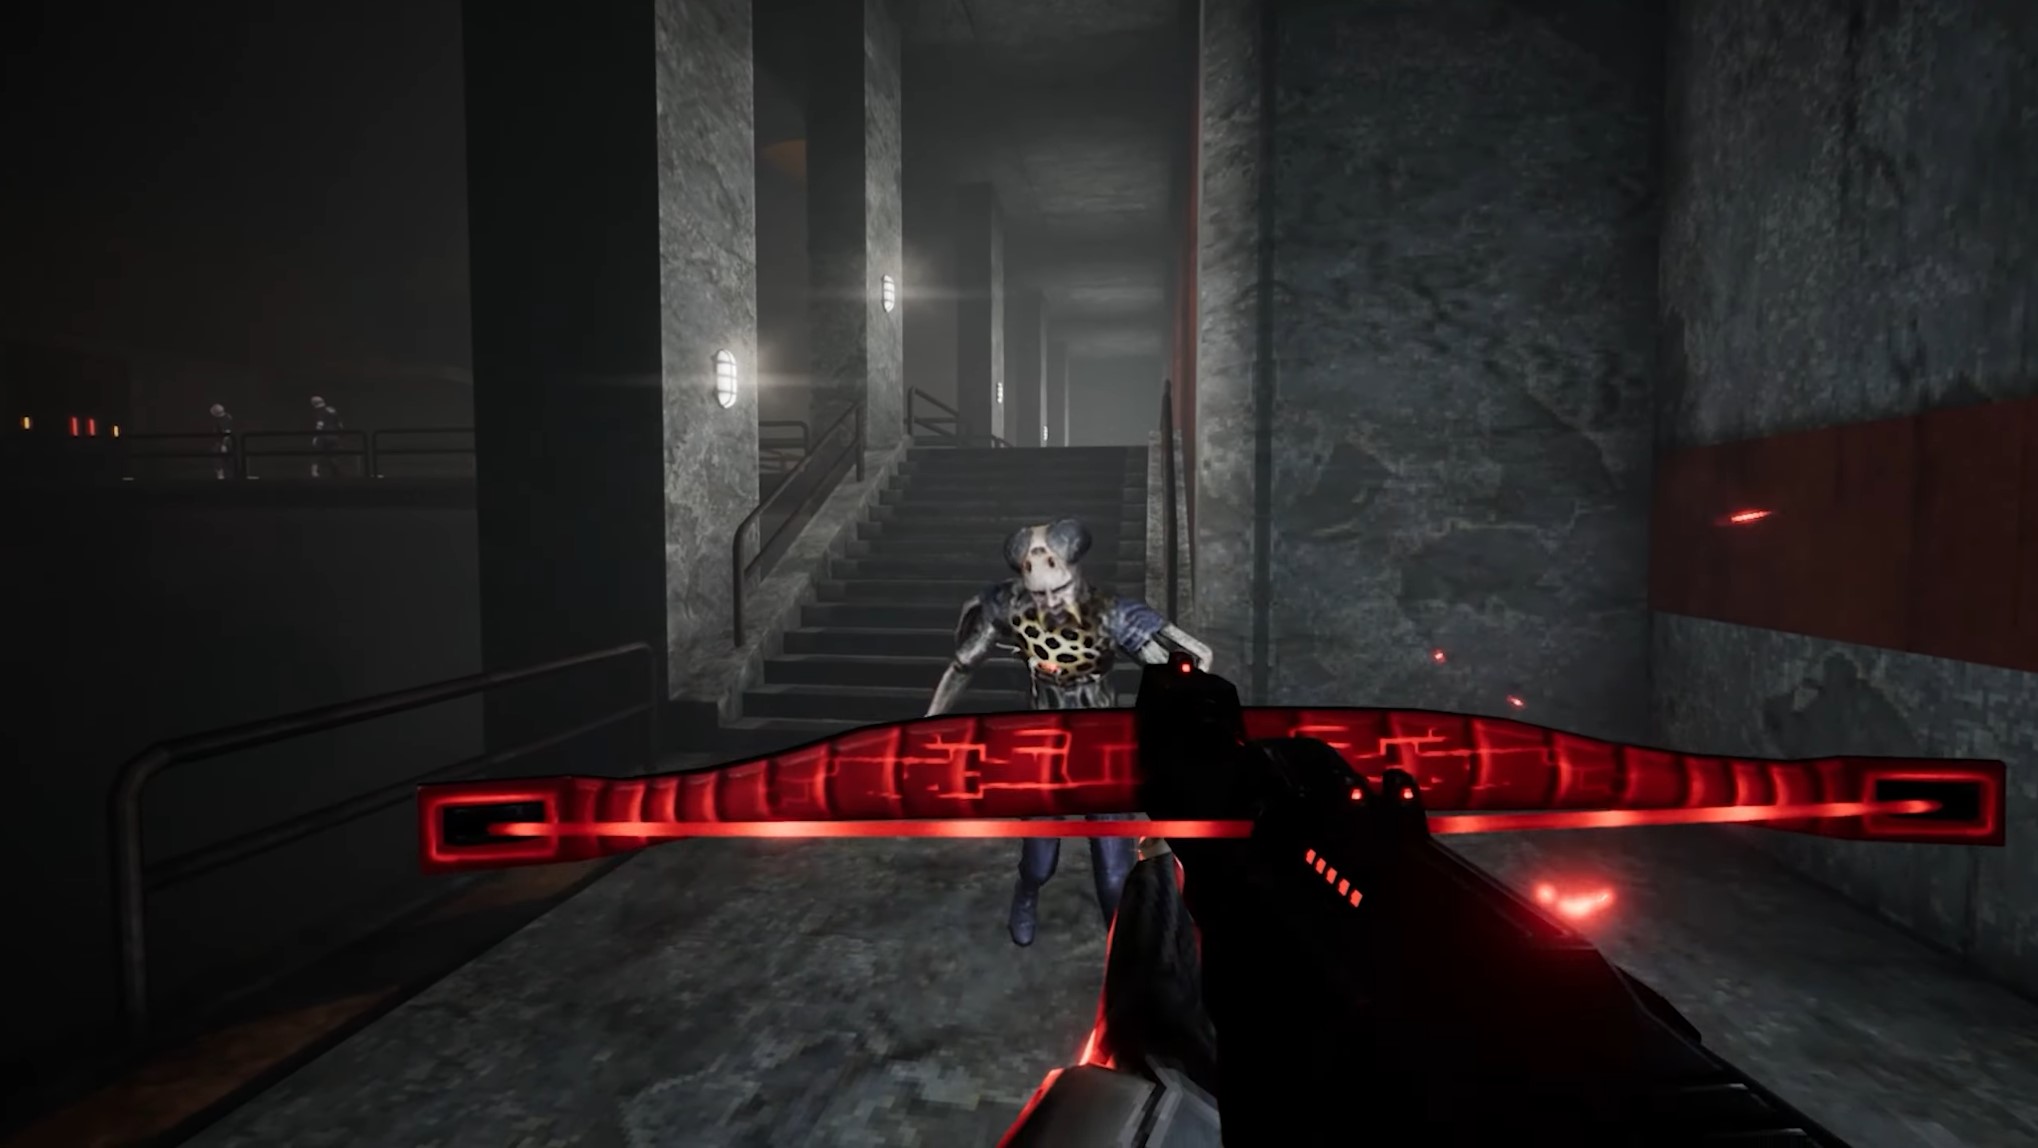 facing down some manner of arcane horror in darkened room with glowing red crossbow.